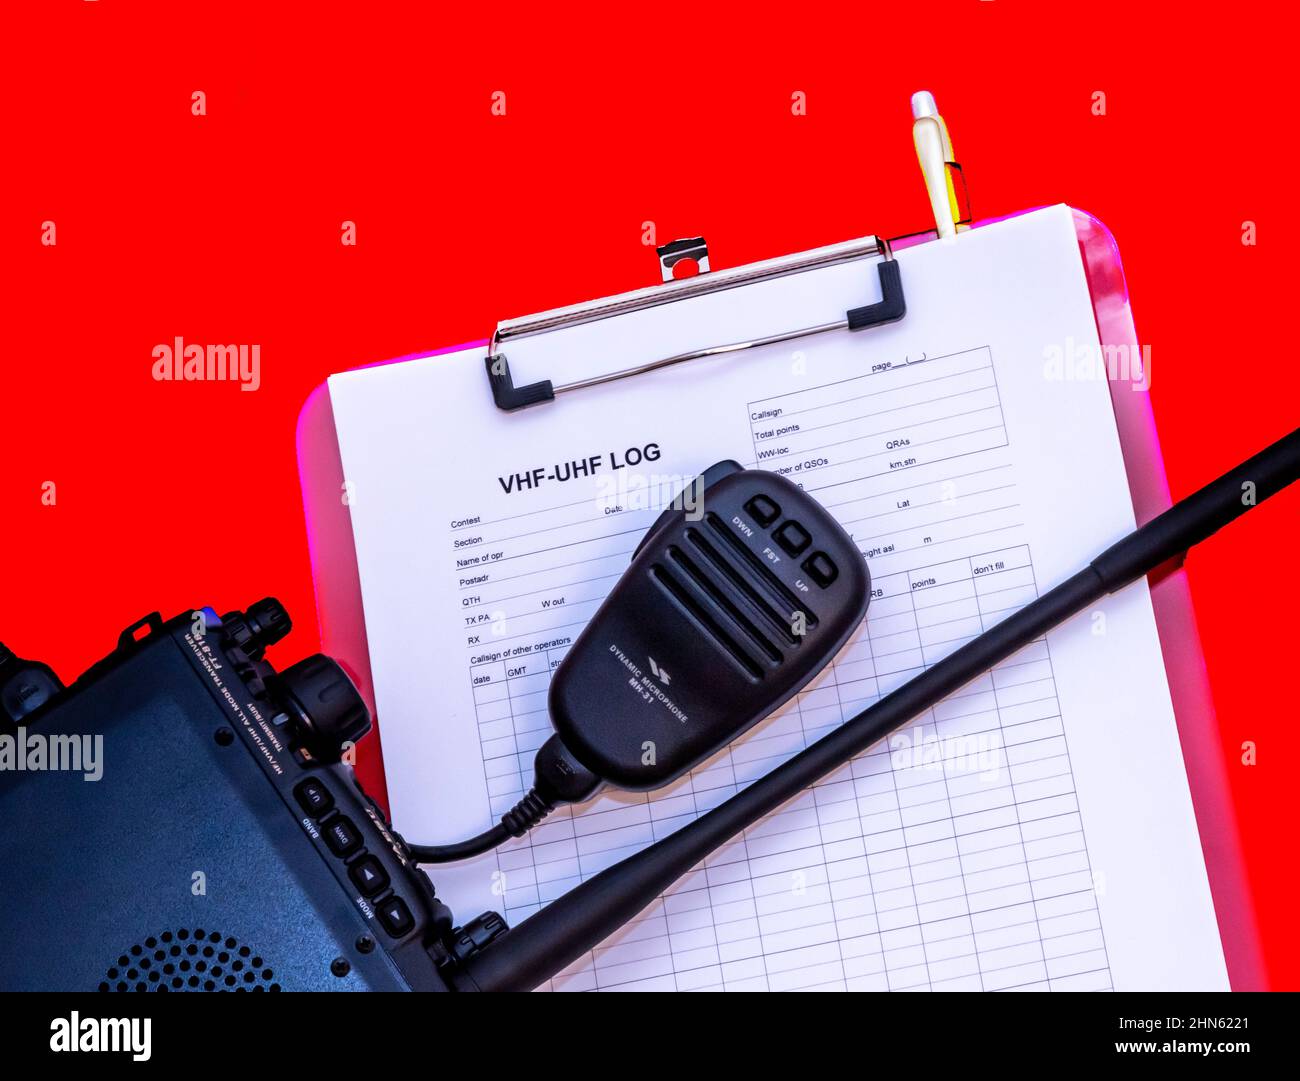 Amateur radio transceiver with antenna and microphone pictured together with a VHF/UHF radio contest log sheet clipped to a board. Stock Photo